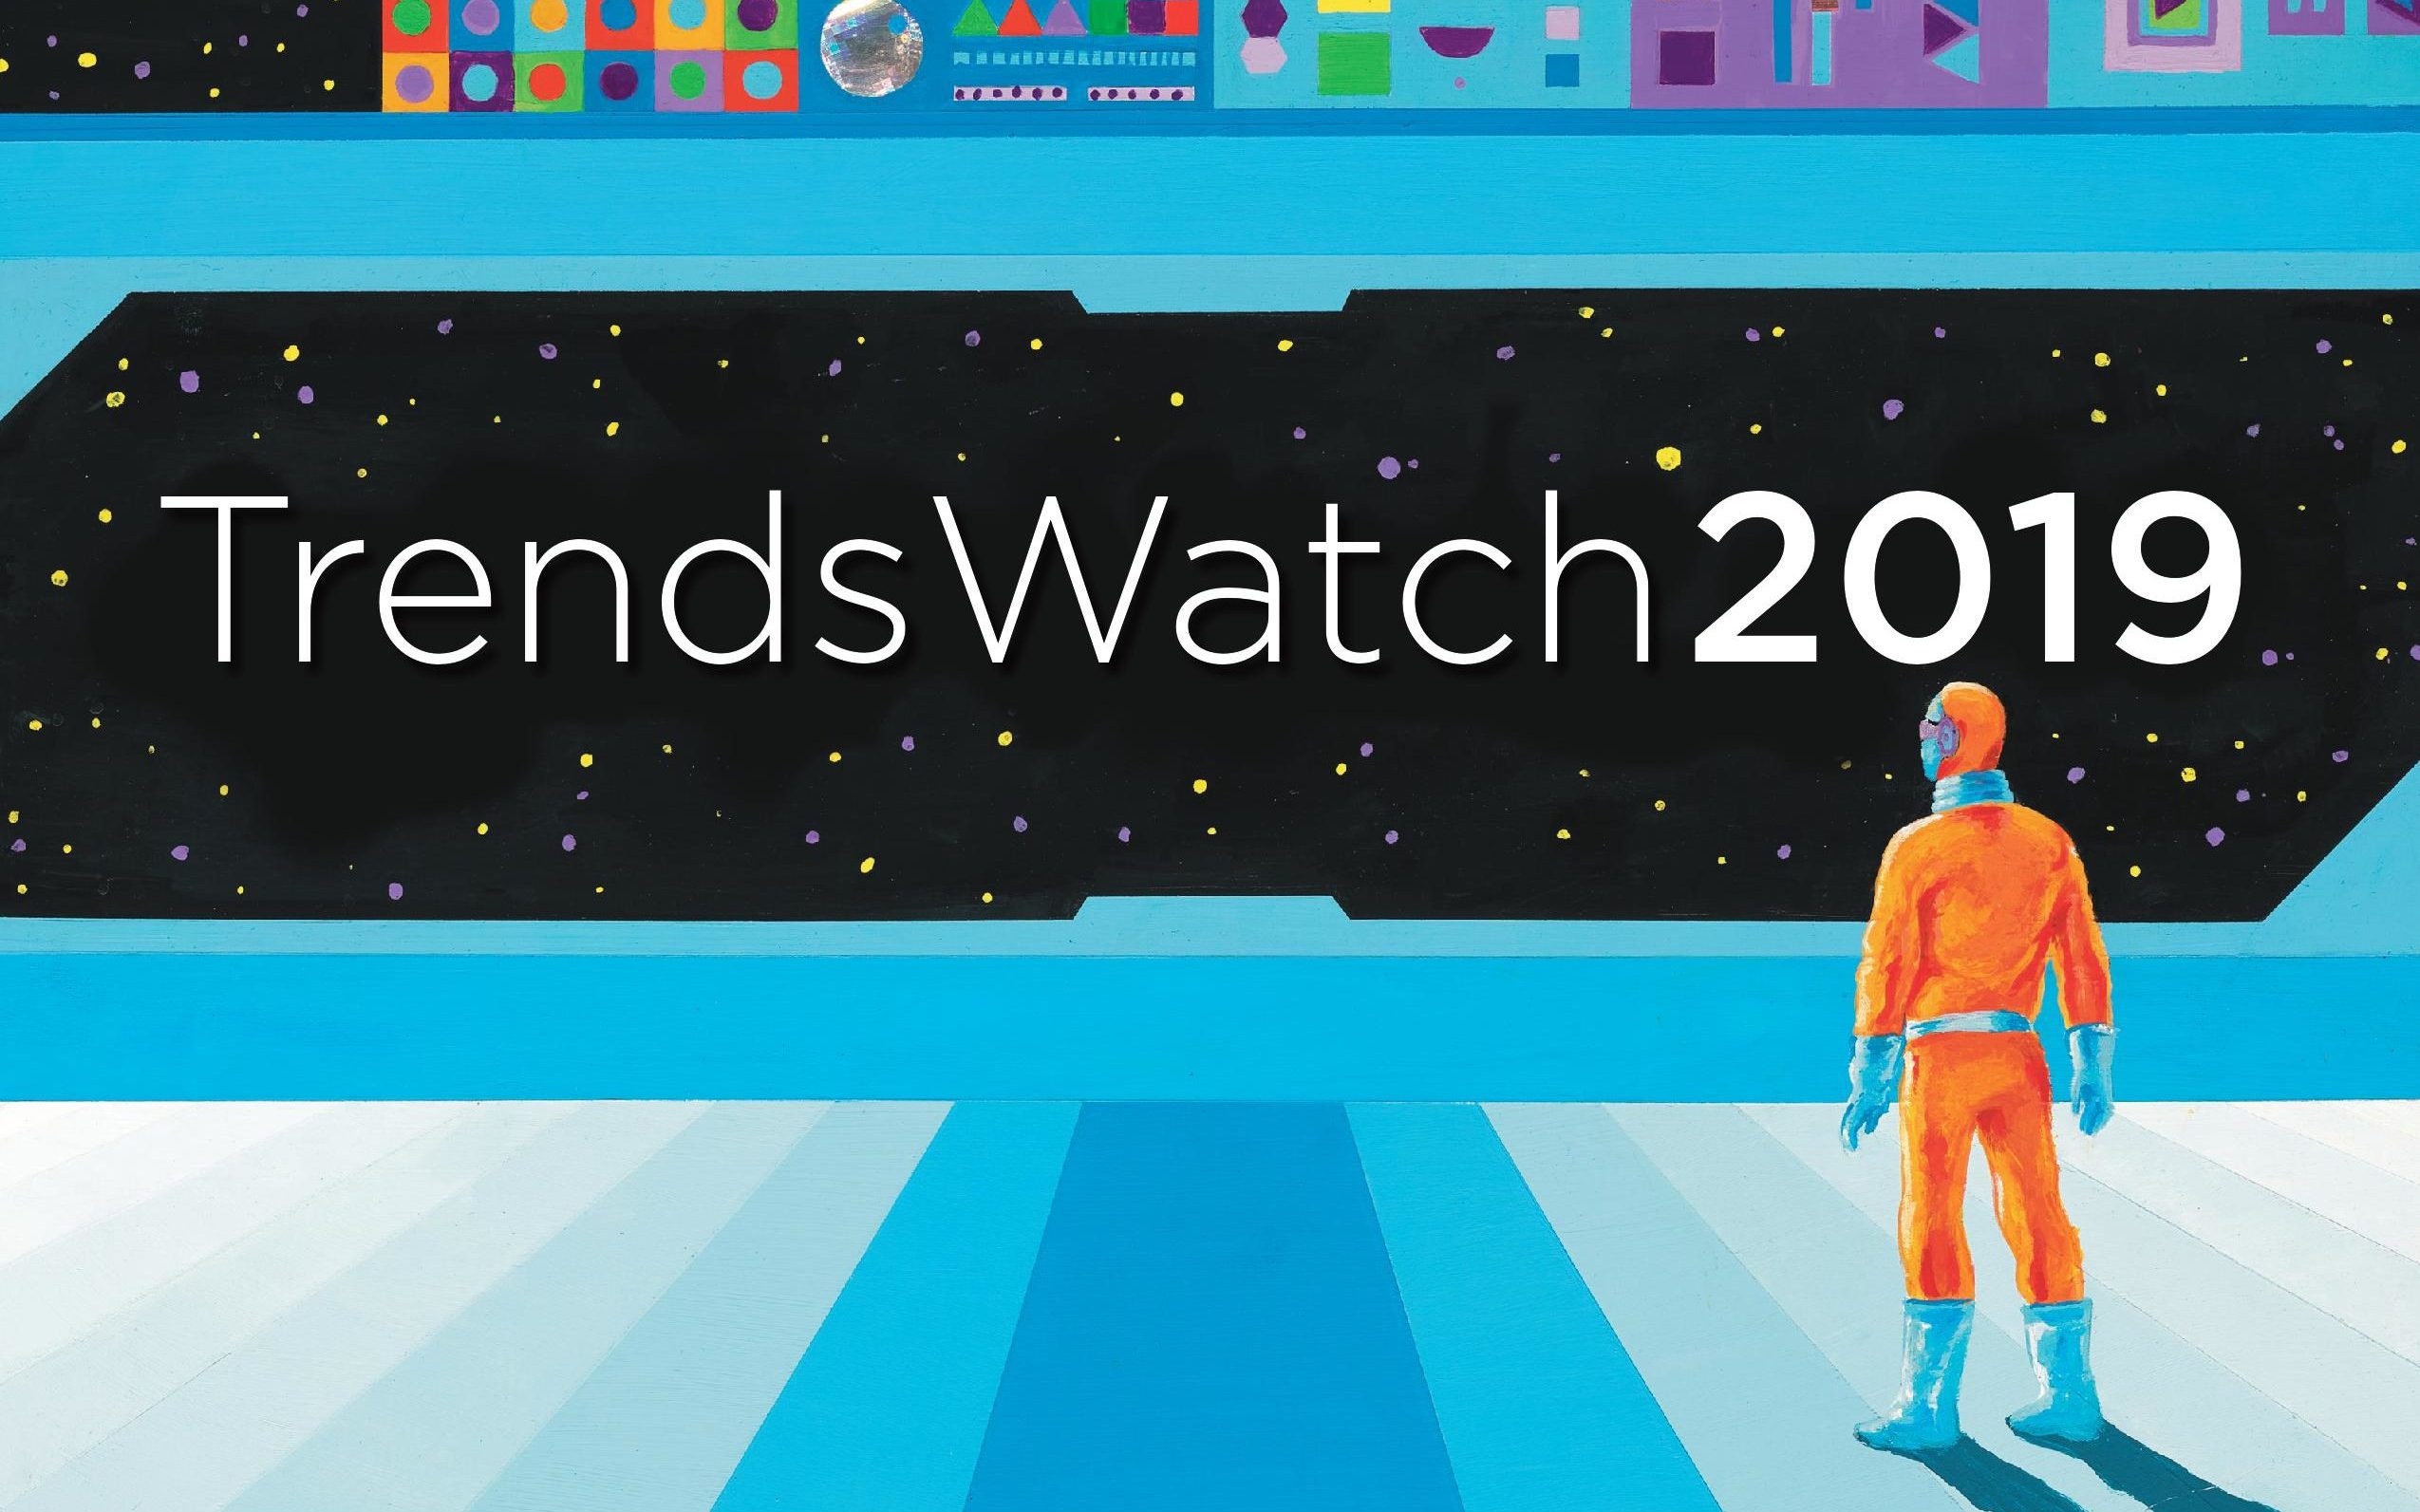 In the cover art for the 2019 edition of TrendsWatch, a figure in futuristic dress looks out into a view of space with a console consisting of abstract shapes above it.